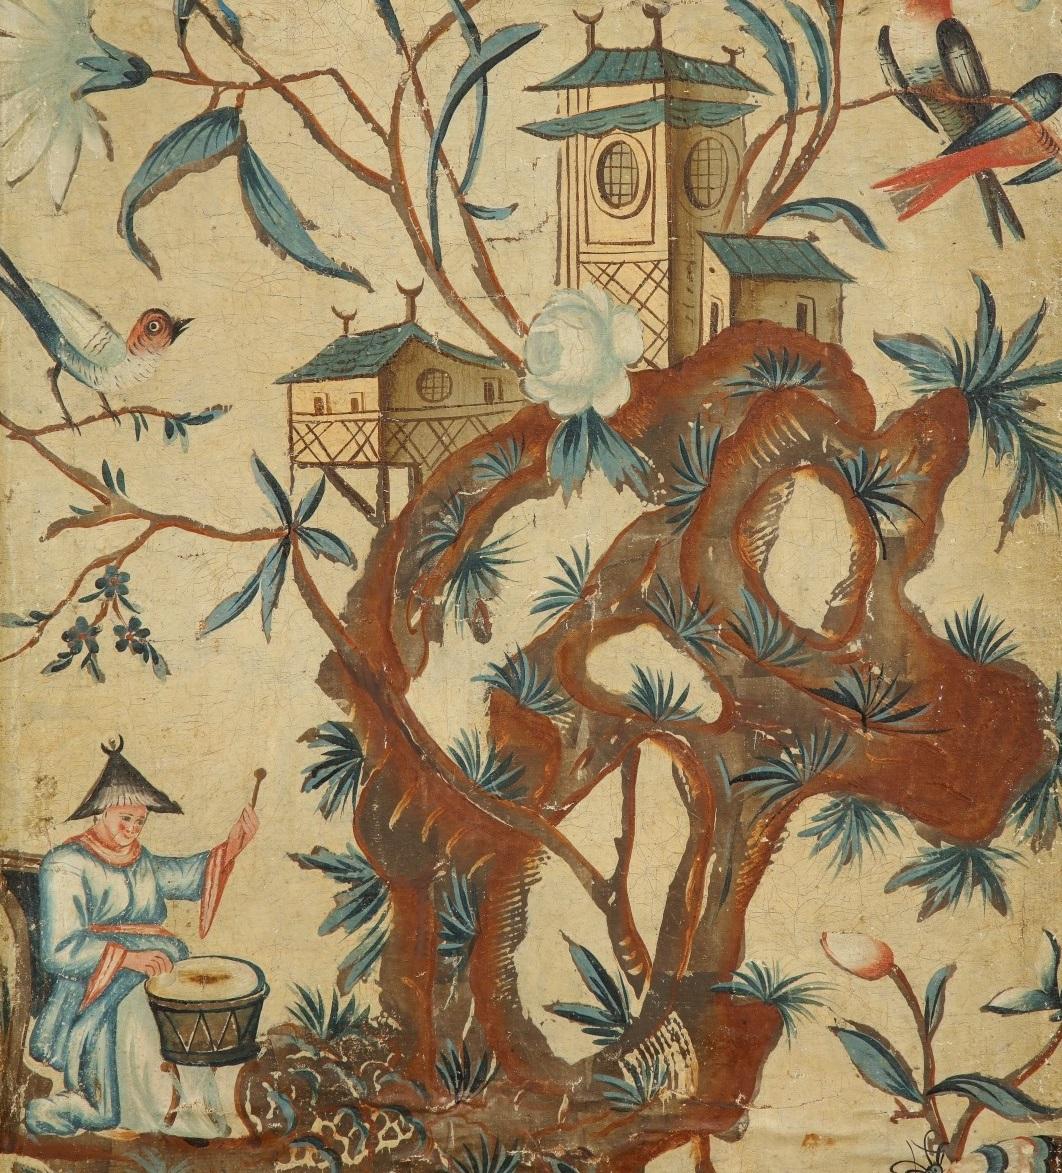 A set of four Italian chinoiserie painted panels, each within frames, depicting fanciful chinoiserie birds, vegetation, pagodas and figures at leisure, circa 1820. Possibly from Piemonte. All four panels have been re-lined.